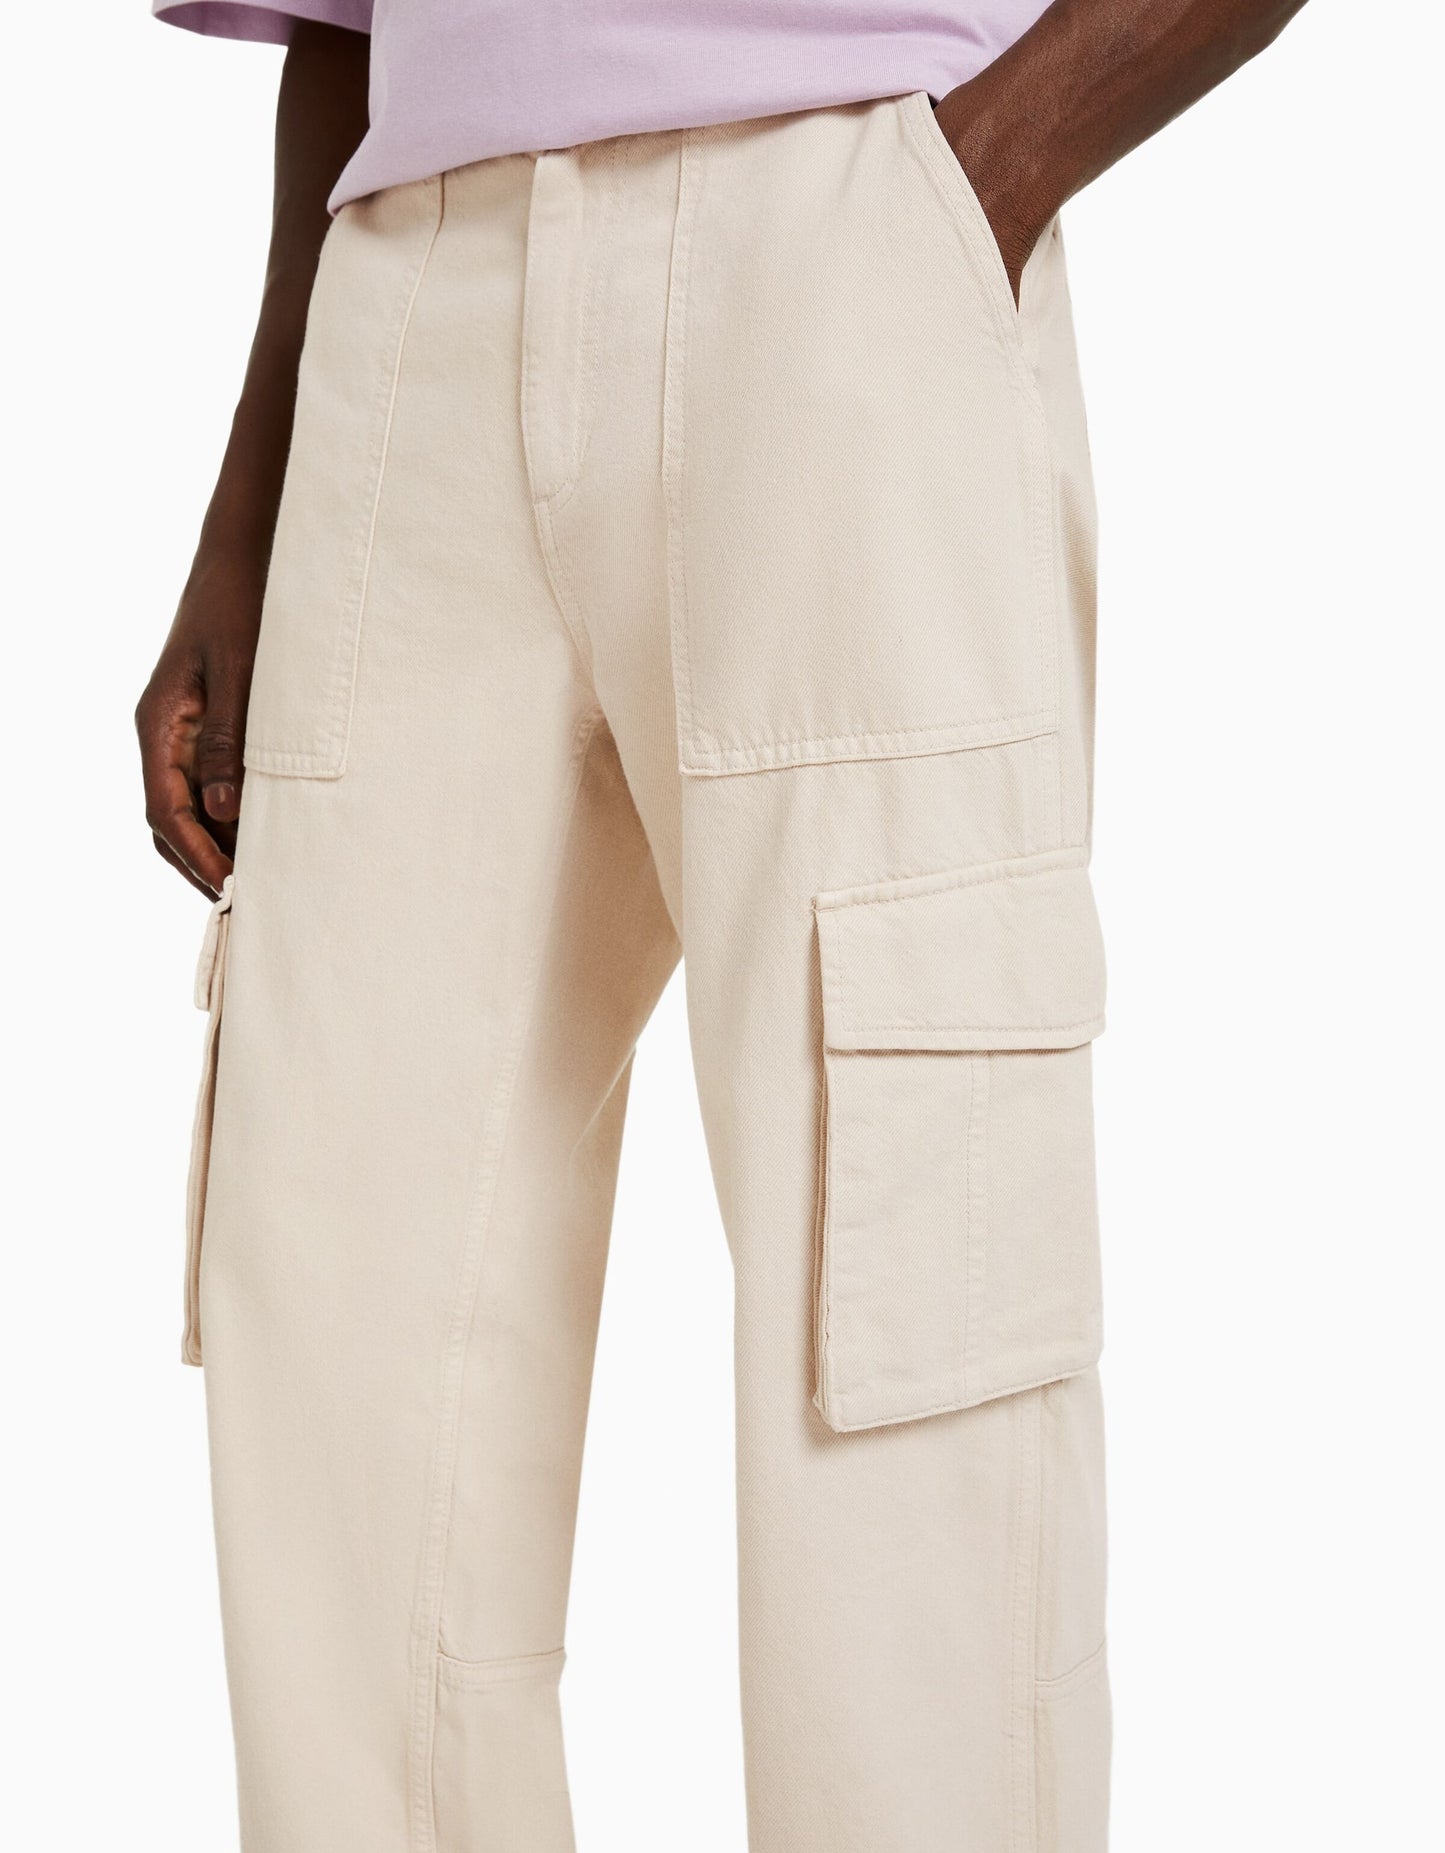 DOUBLE POCKET COTTON TWILL PANT